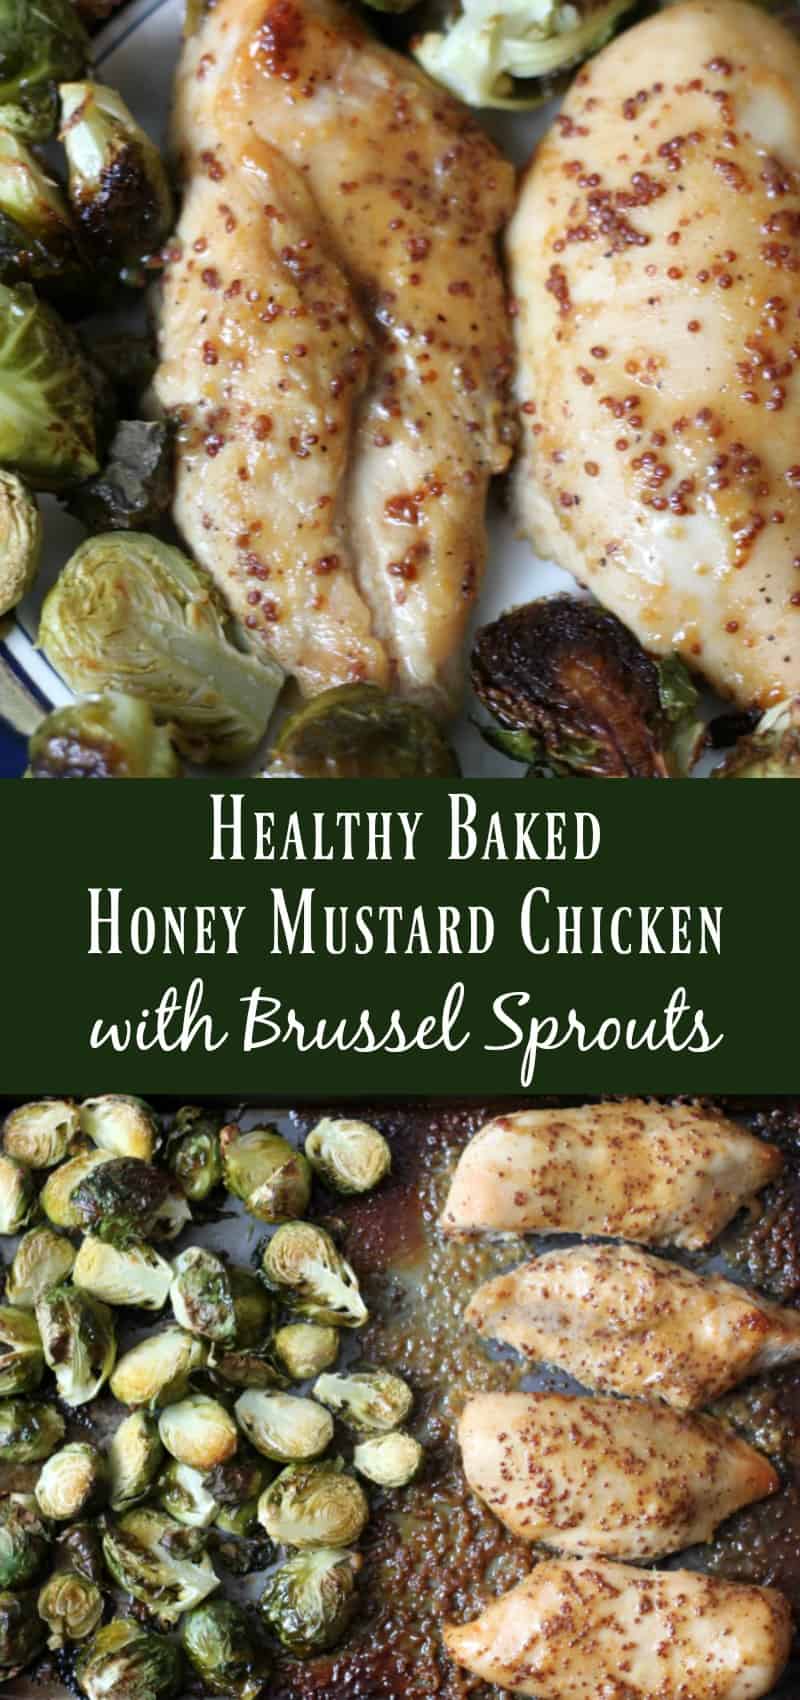 Healthy Baked Honey Mustard Chicken with Brussel Sprouts